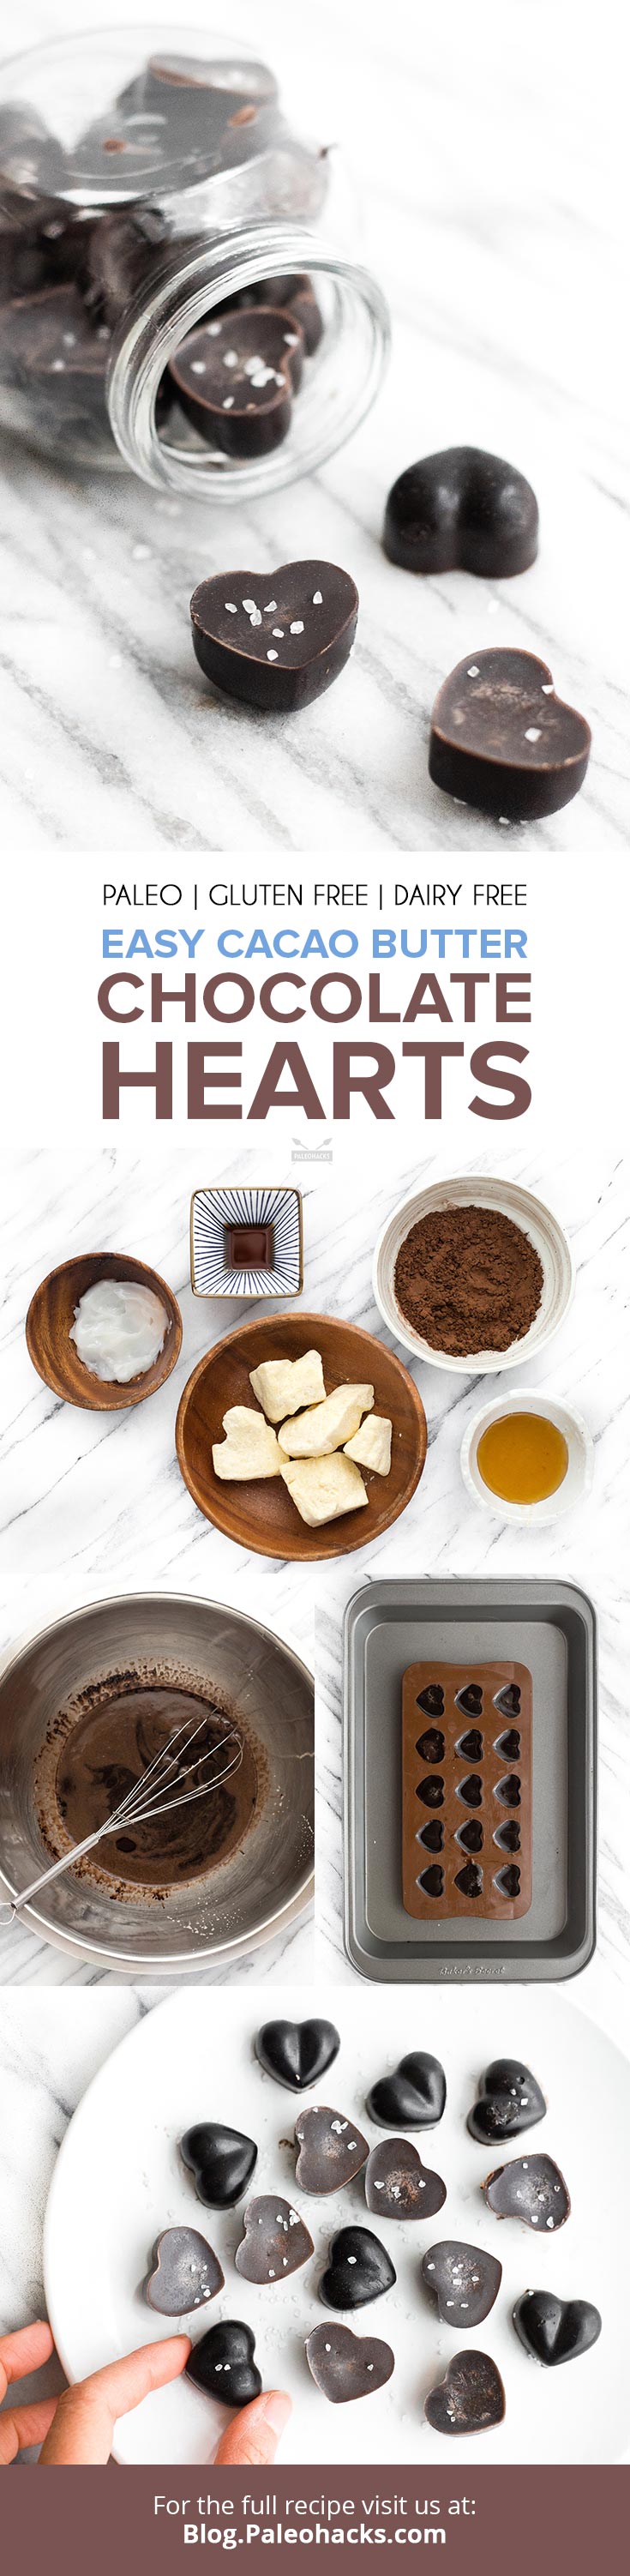 Make these easy cacao butter chocolates for your sweetheart this Valentine’s day - in less than an hour. Nothing says 